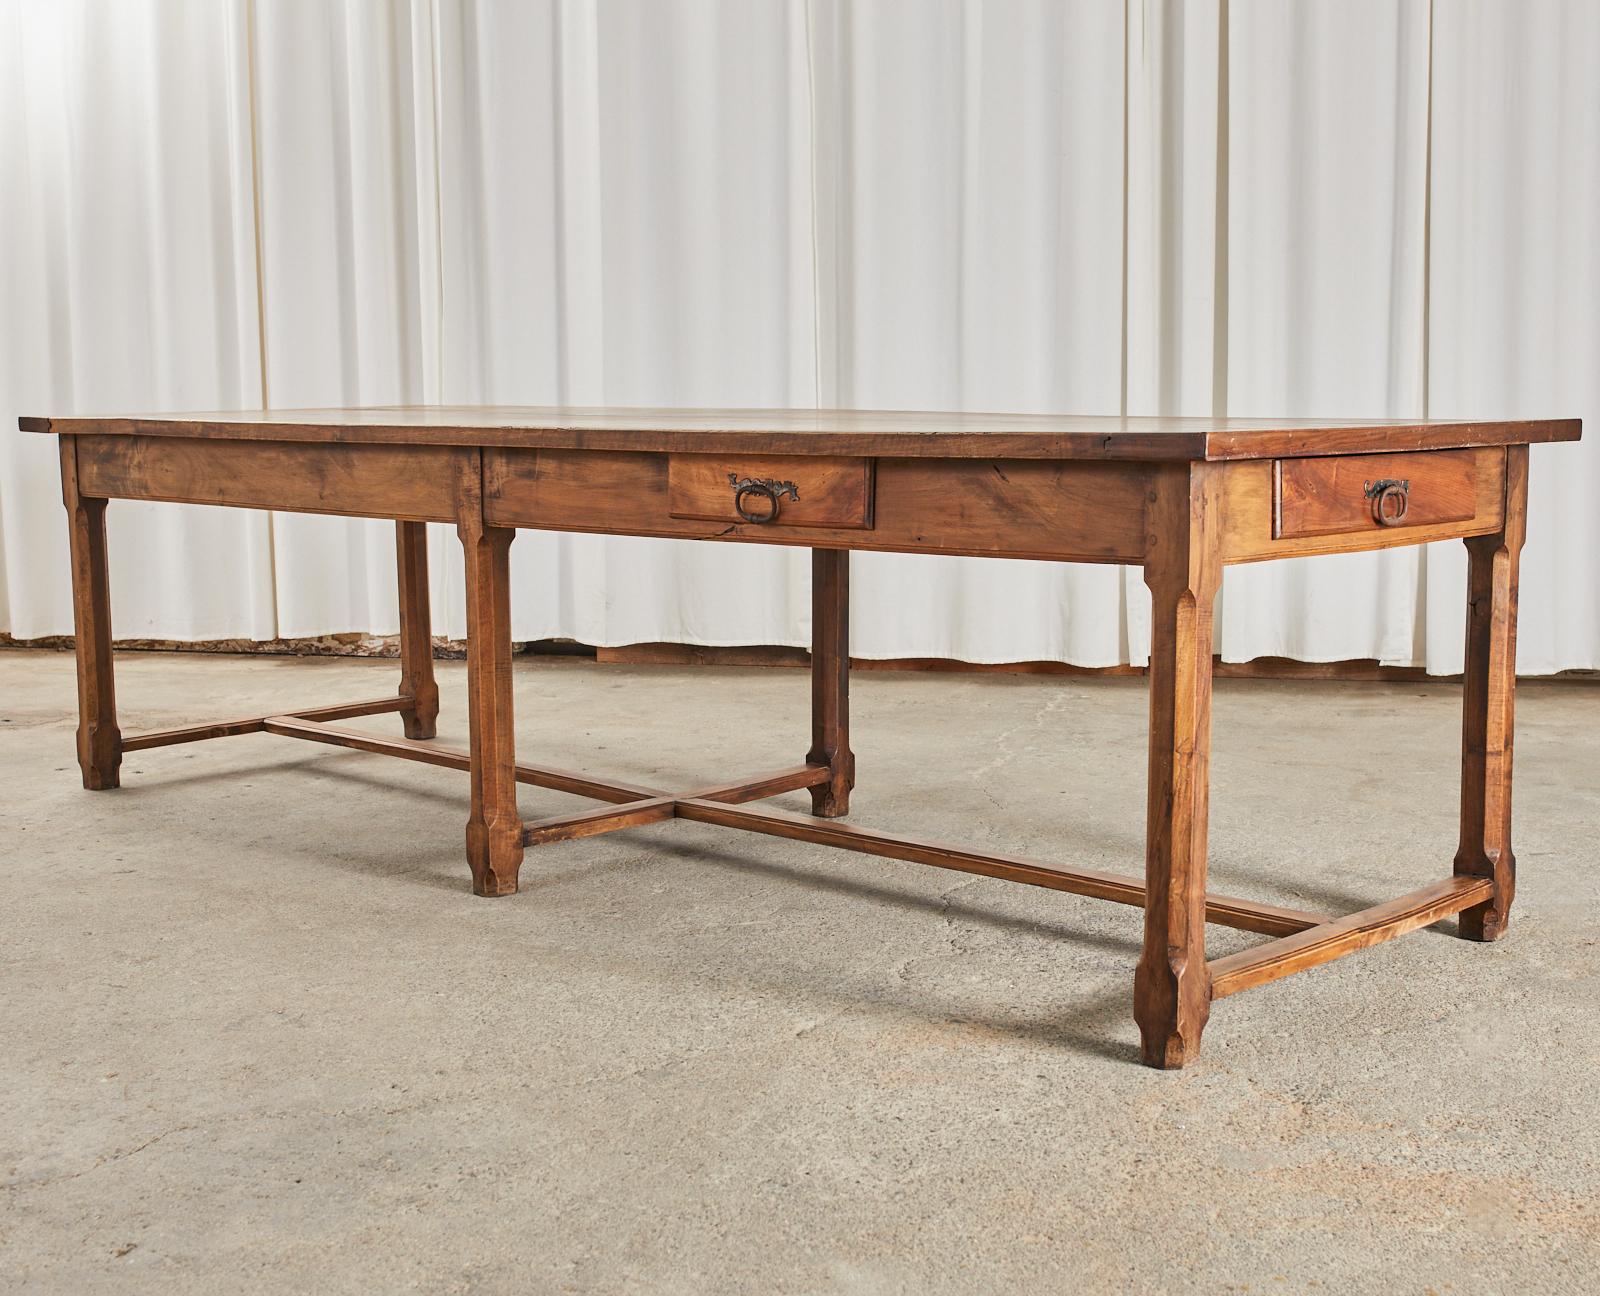 Monumental 19th century country French provincial farmhouse trestle dining table or refectory table hand-crafted from walnut. The massive table has a 1.25 inch thick plank top with breadboard ends. All four sides of the table have a storage drawer